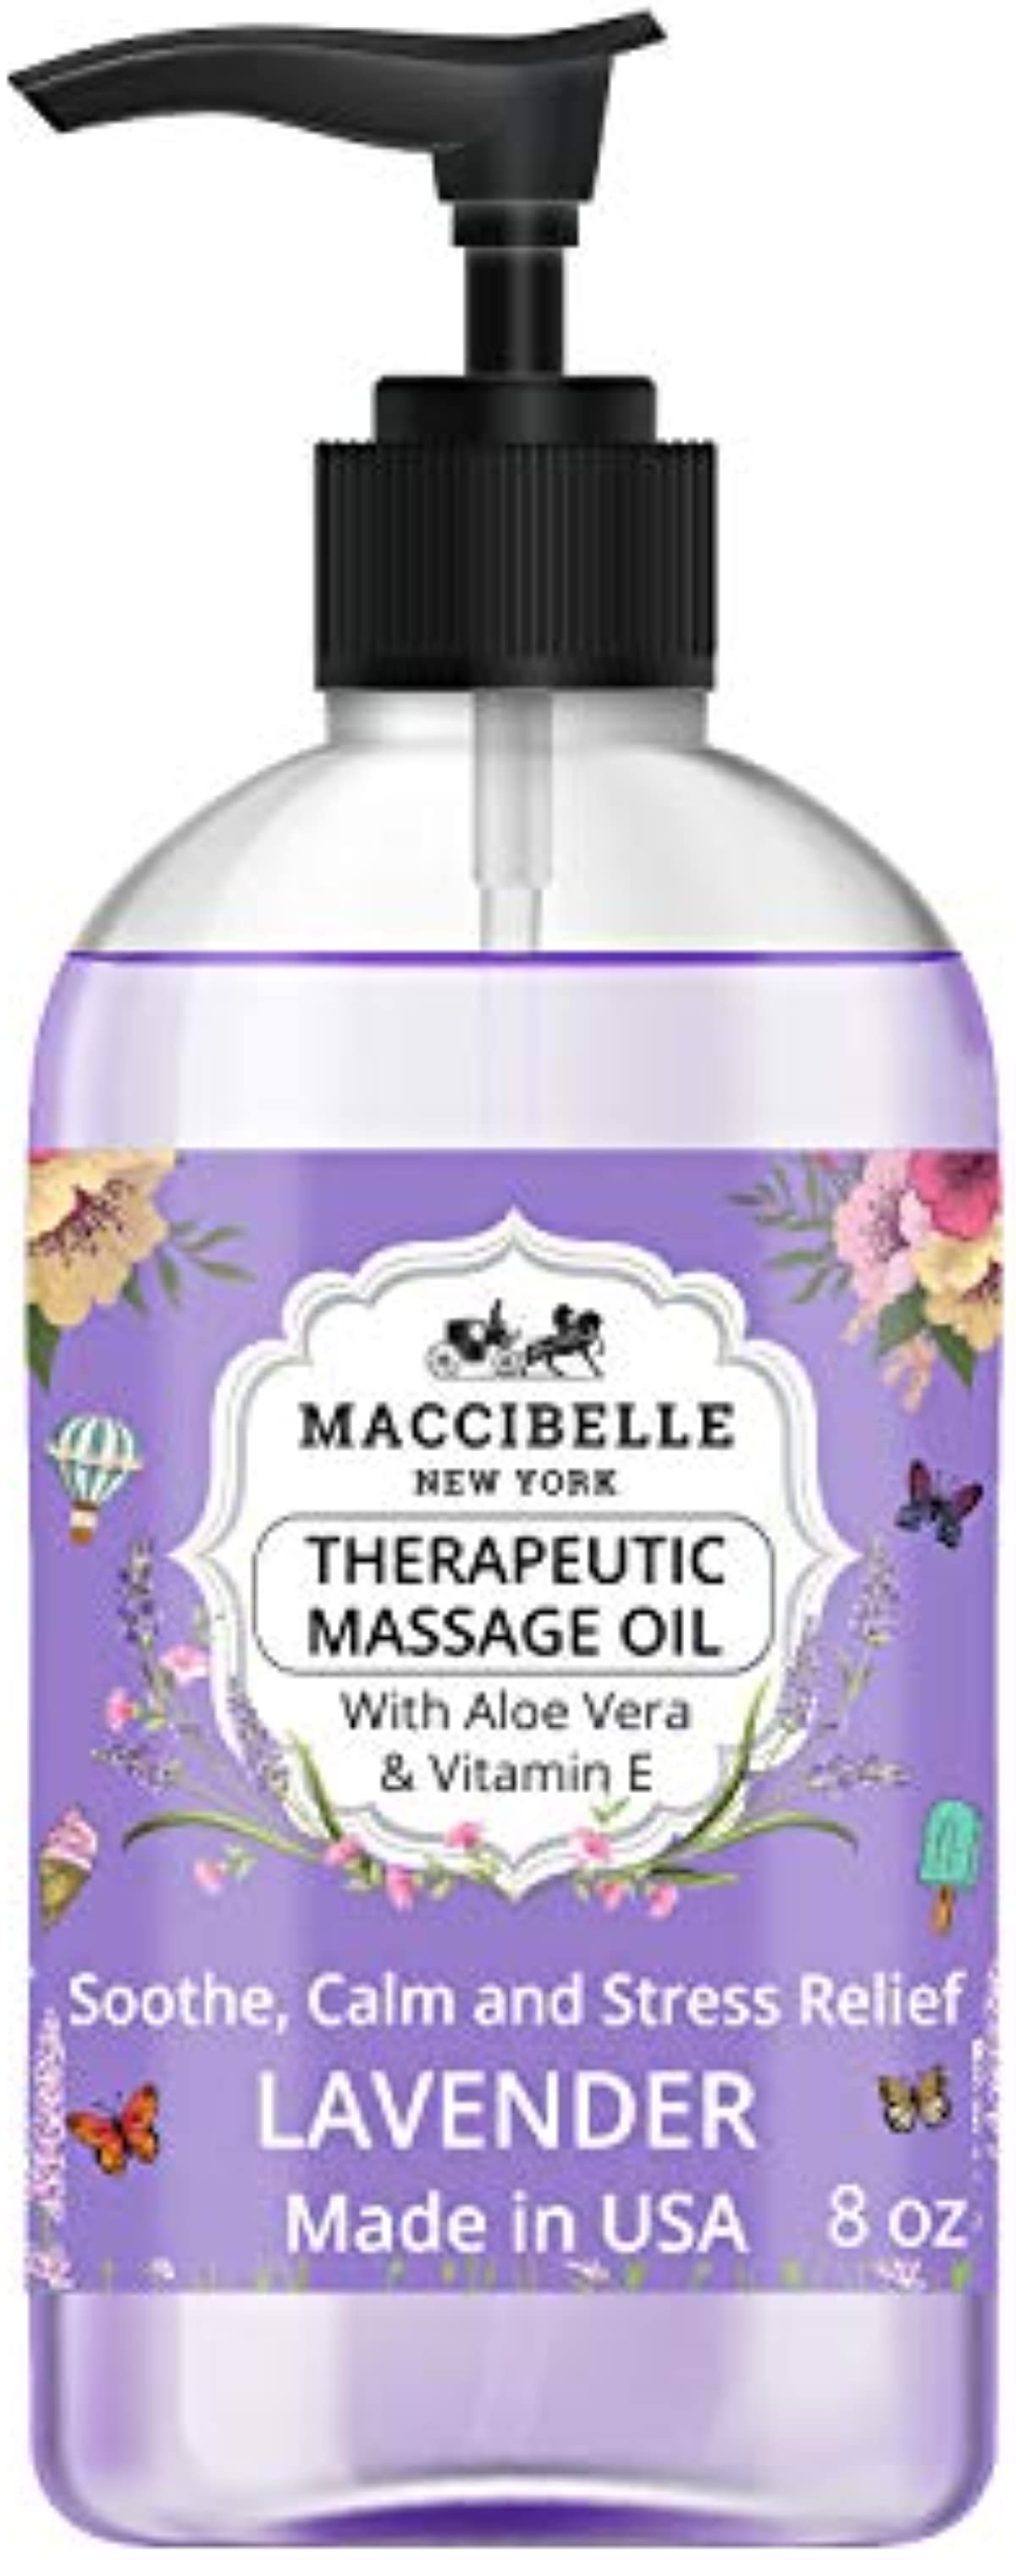 Maccibelle Natural Sensual Massage Oil for Couples Therapeutic and Aromatherapy Massage with Vitamin E, Aloe Vera and Lavender for Soothing, Calming and Muscle Relief 8 oz